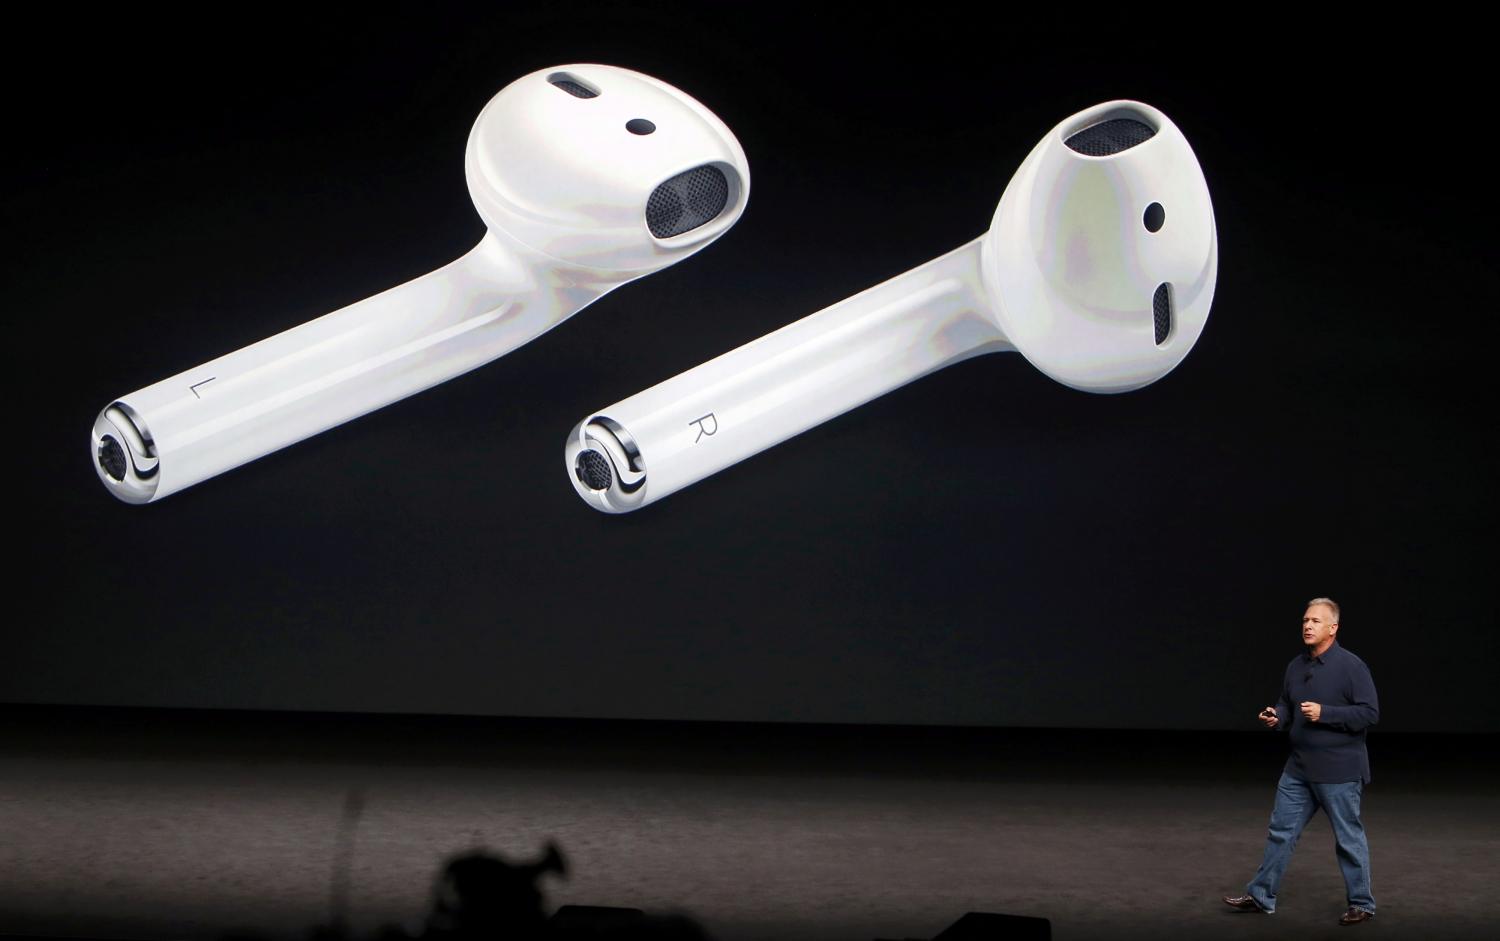 Phil Schiller, Senior Vice President of Worldwide Marketing at Apple Inc, discusses the Apple AirPods during a media event in San Francisco, California, U.S. September 7, 2016. REUTERS/Beck Diefenbach